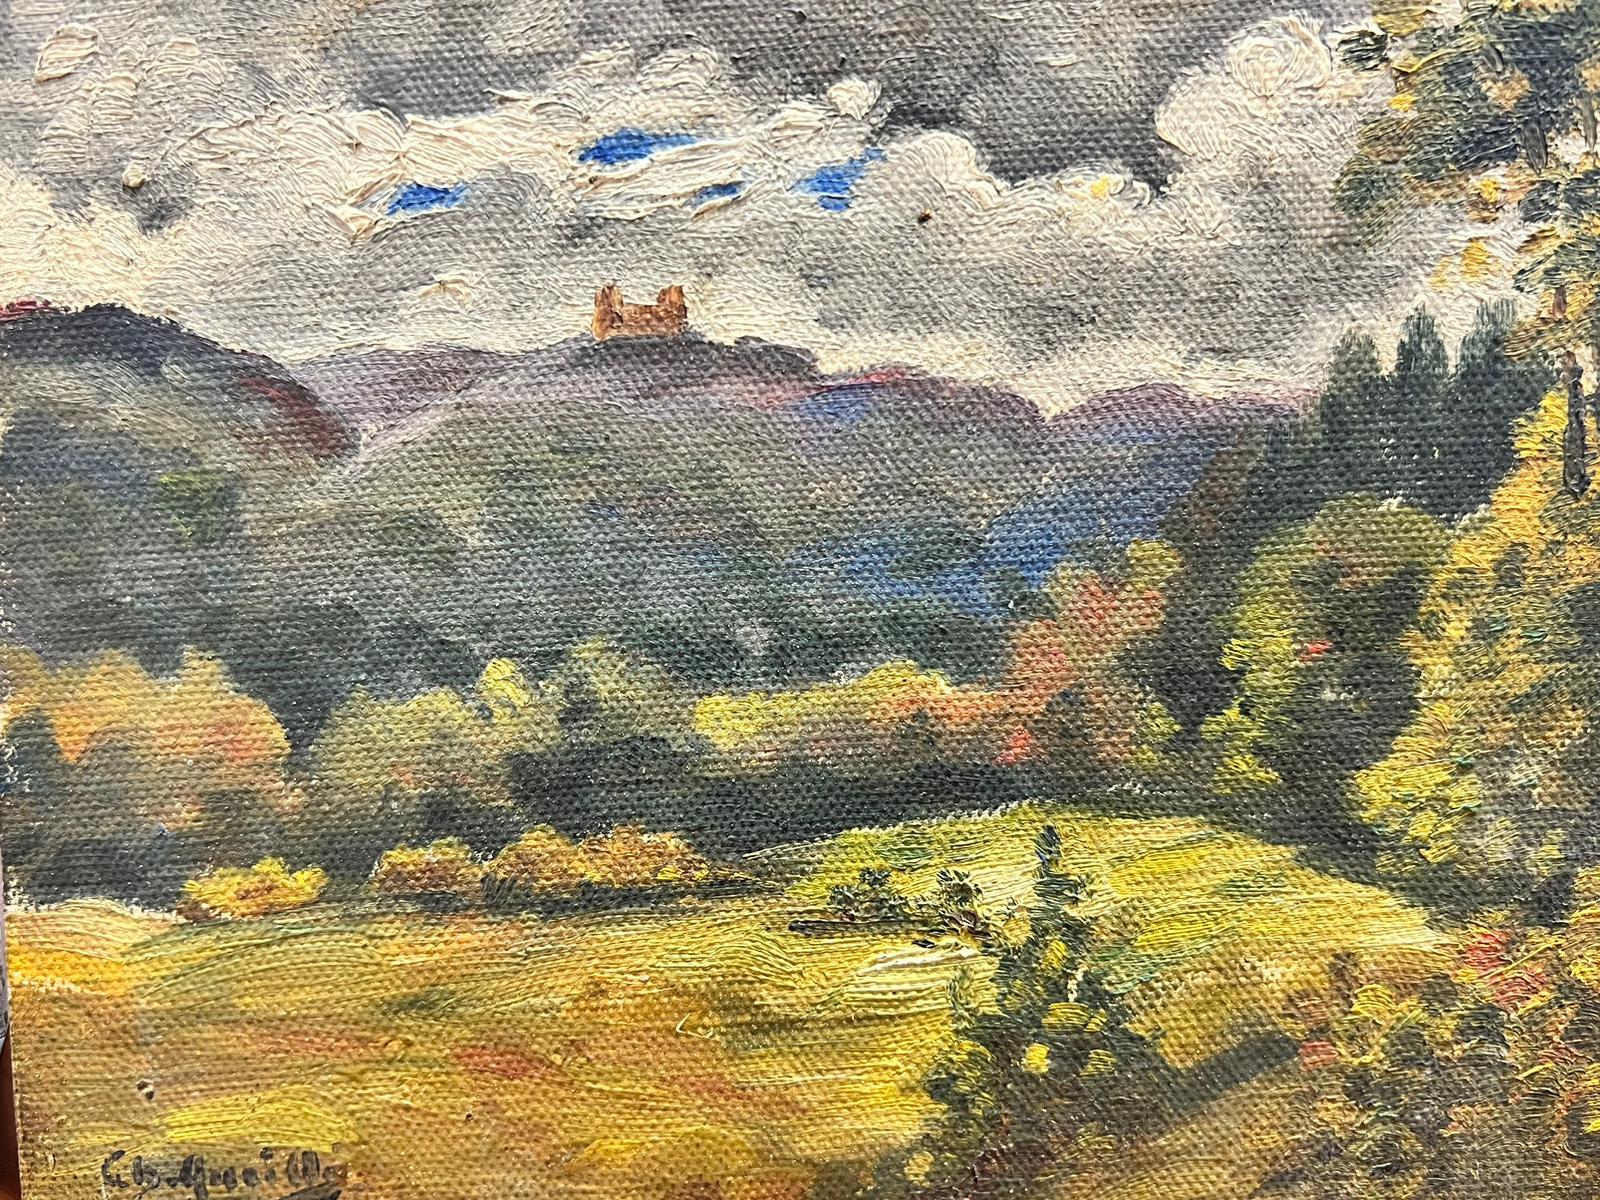 Artist/ School: French School, signed, mid 20th century 

Title: the Old Castle 

Medium: oil on board

Size: 5.5 x 7 inches

Provenance: private collection

Condition: The painting is in overall very good and sound condition
 